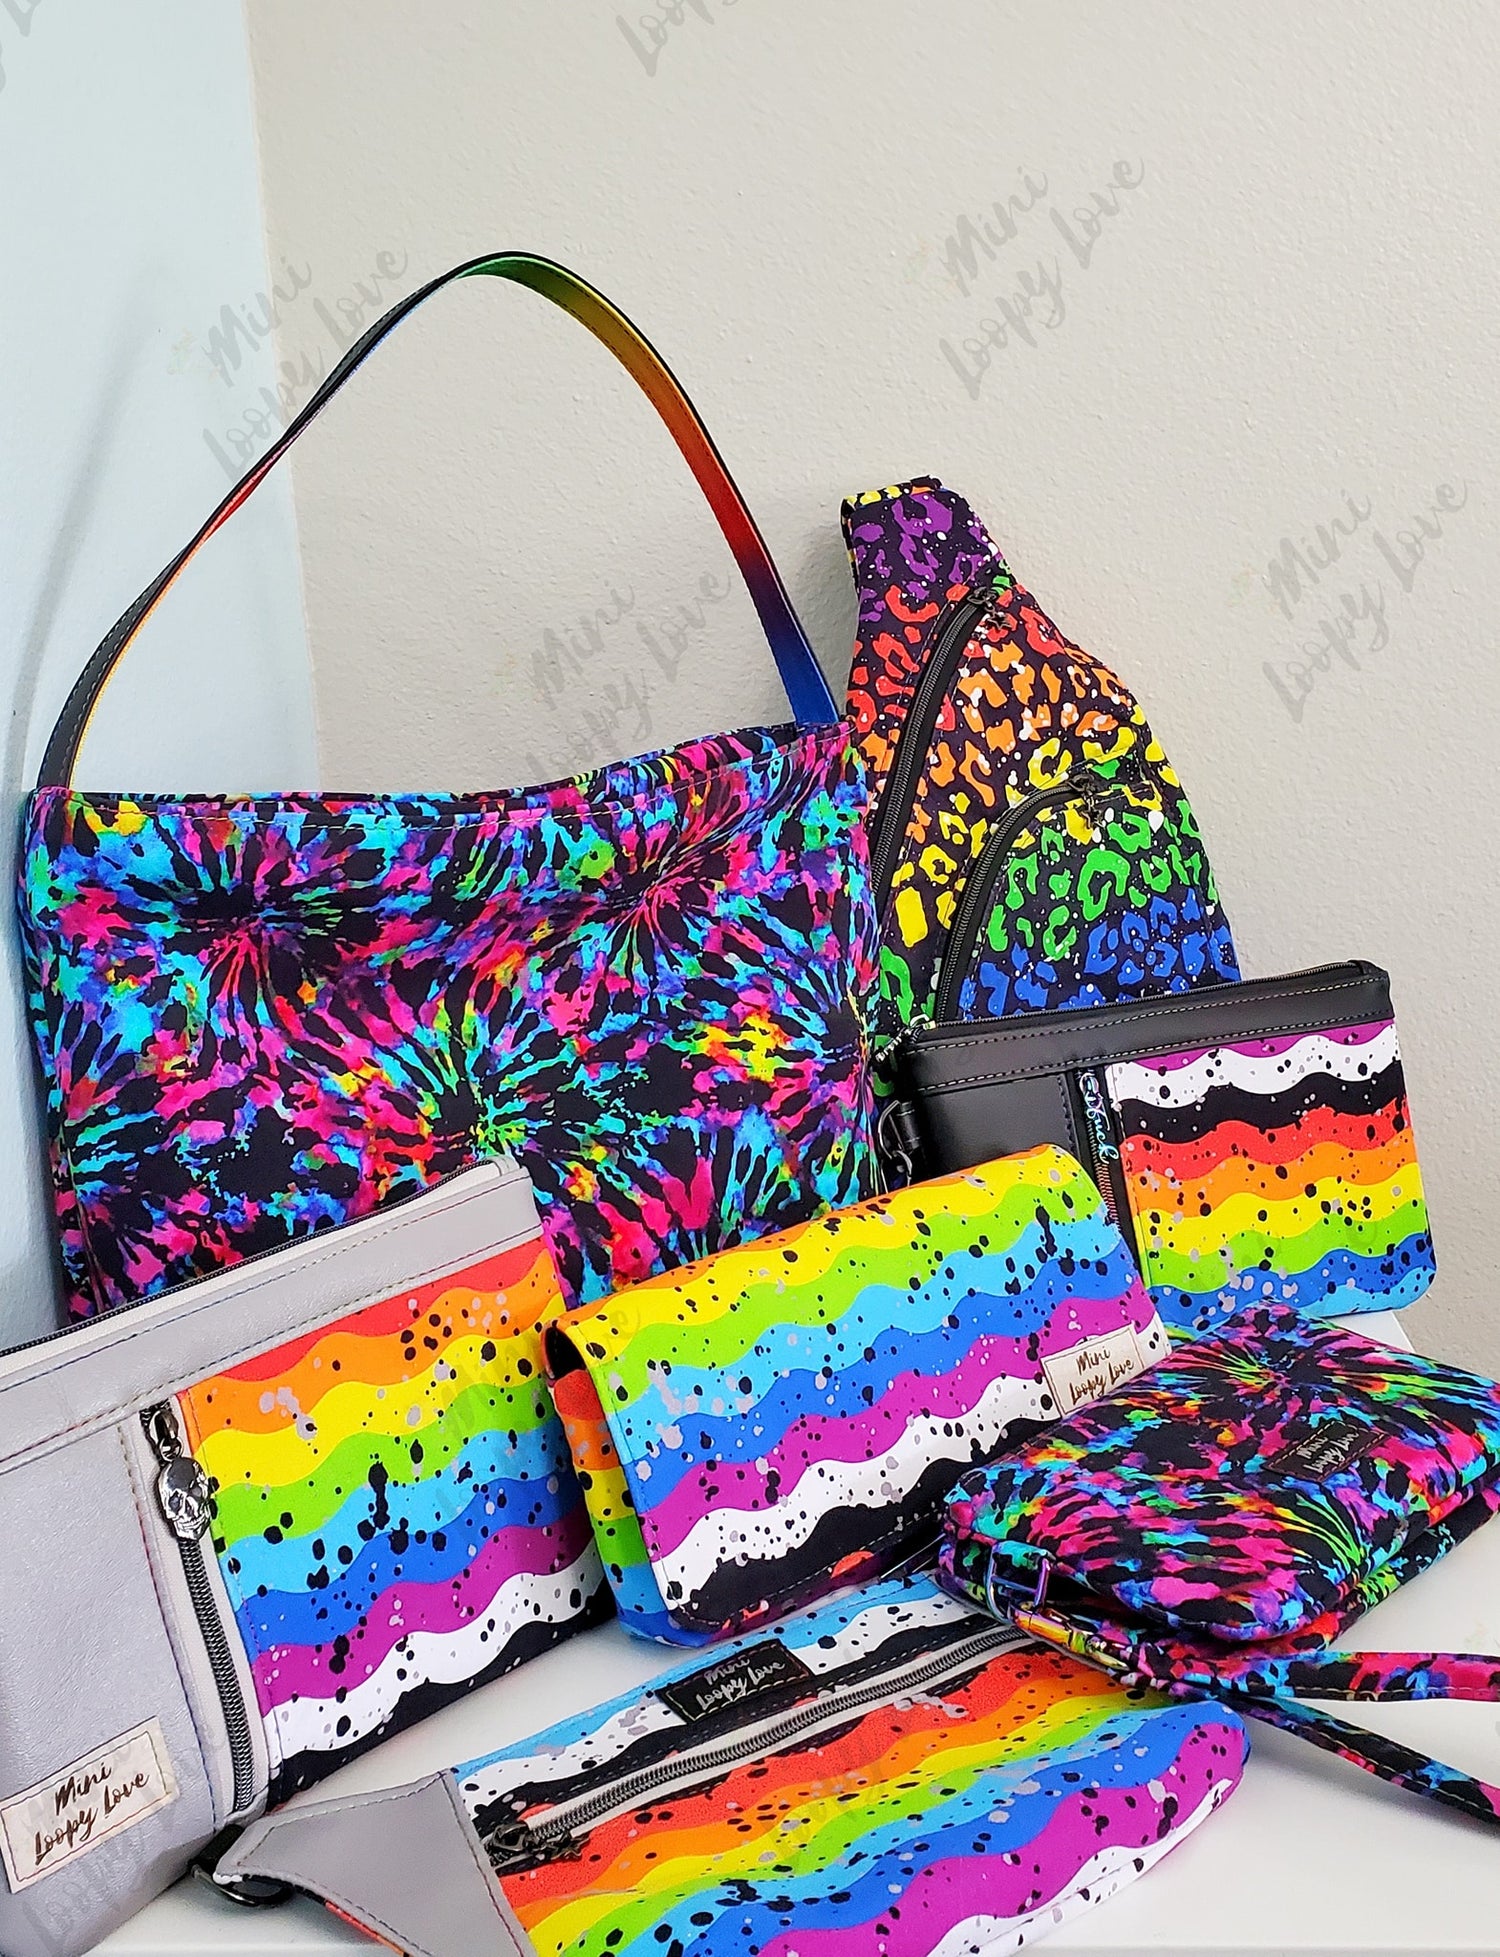 Multiple rainbow bags and wallets